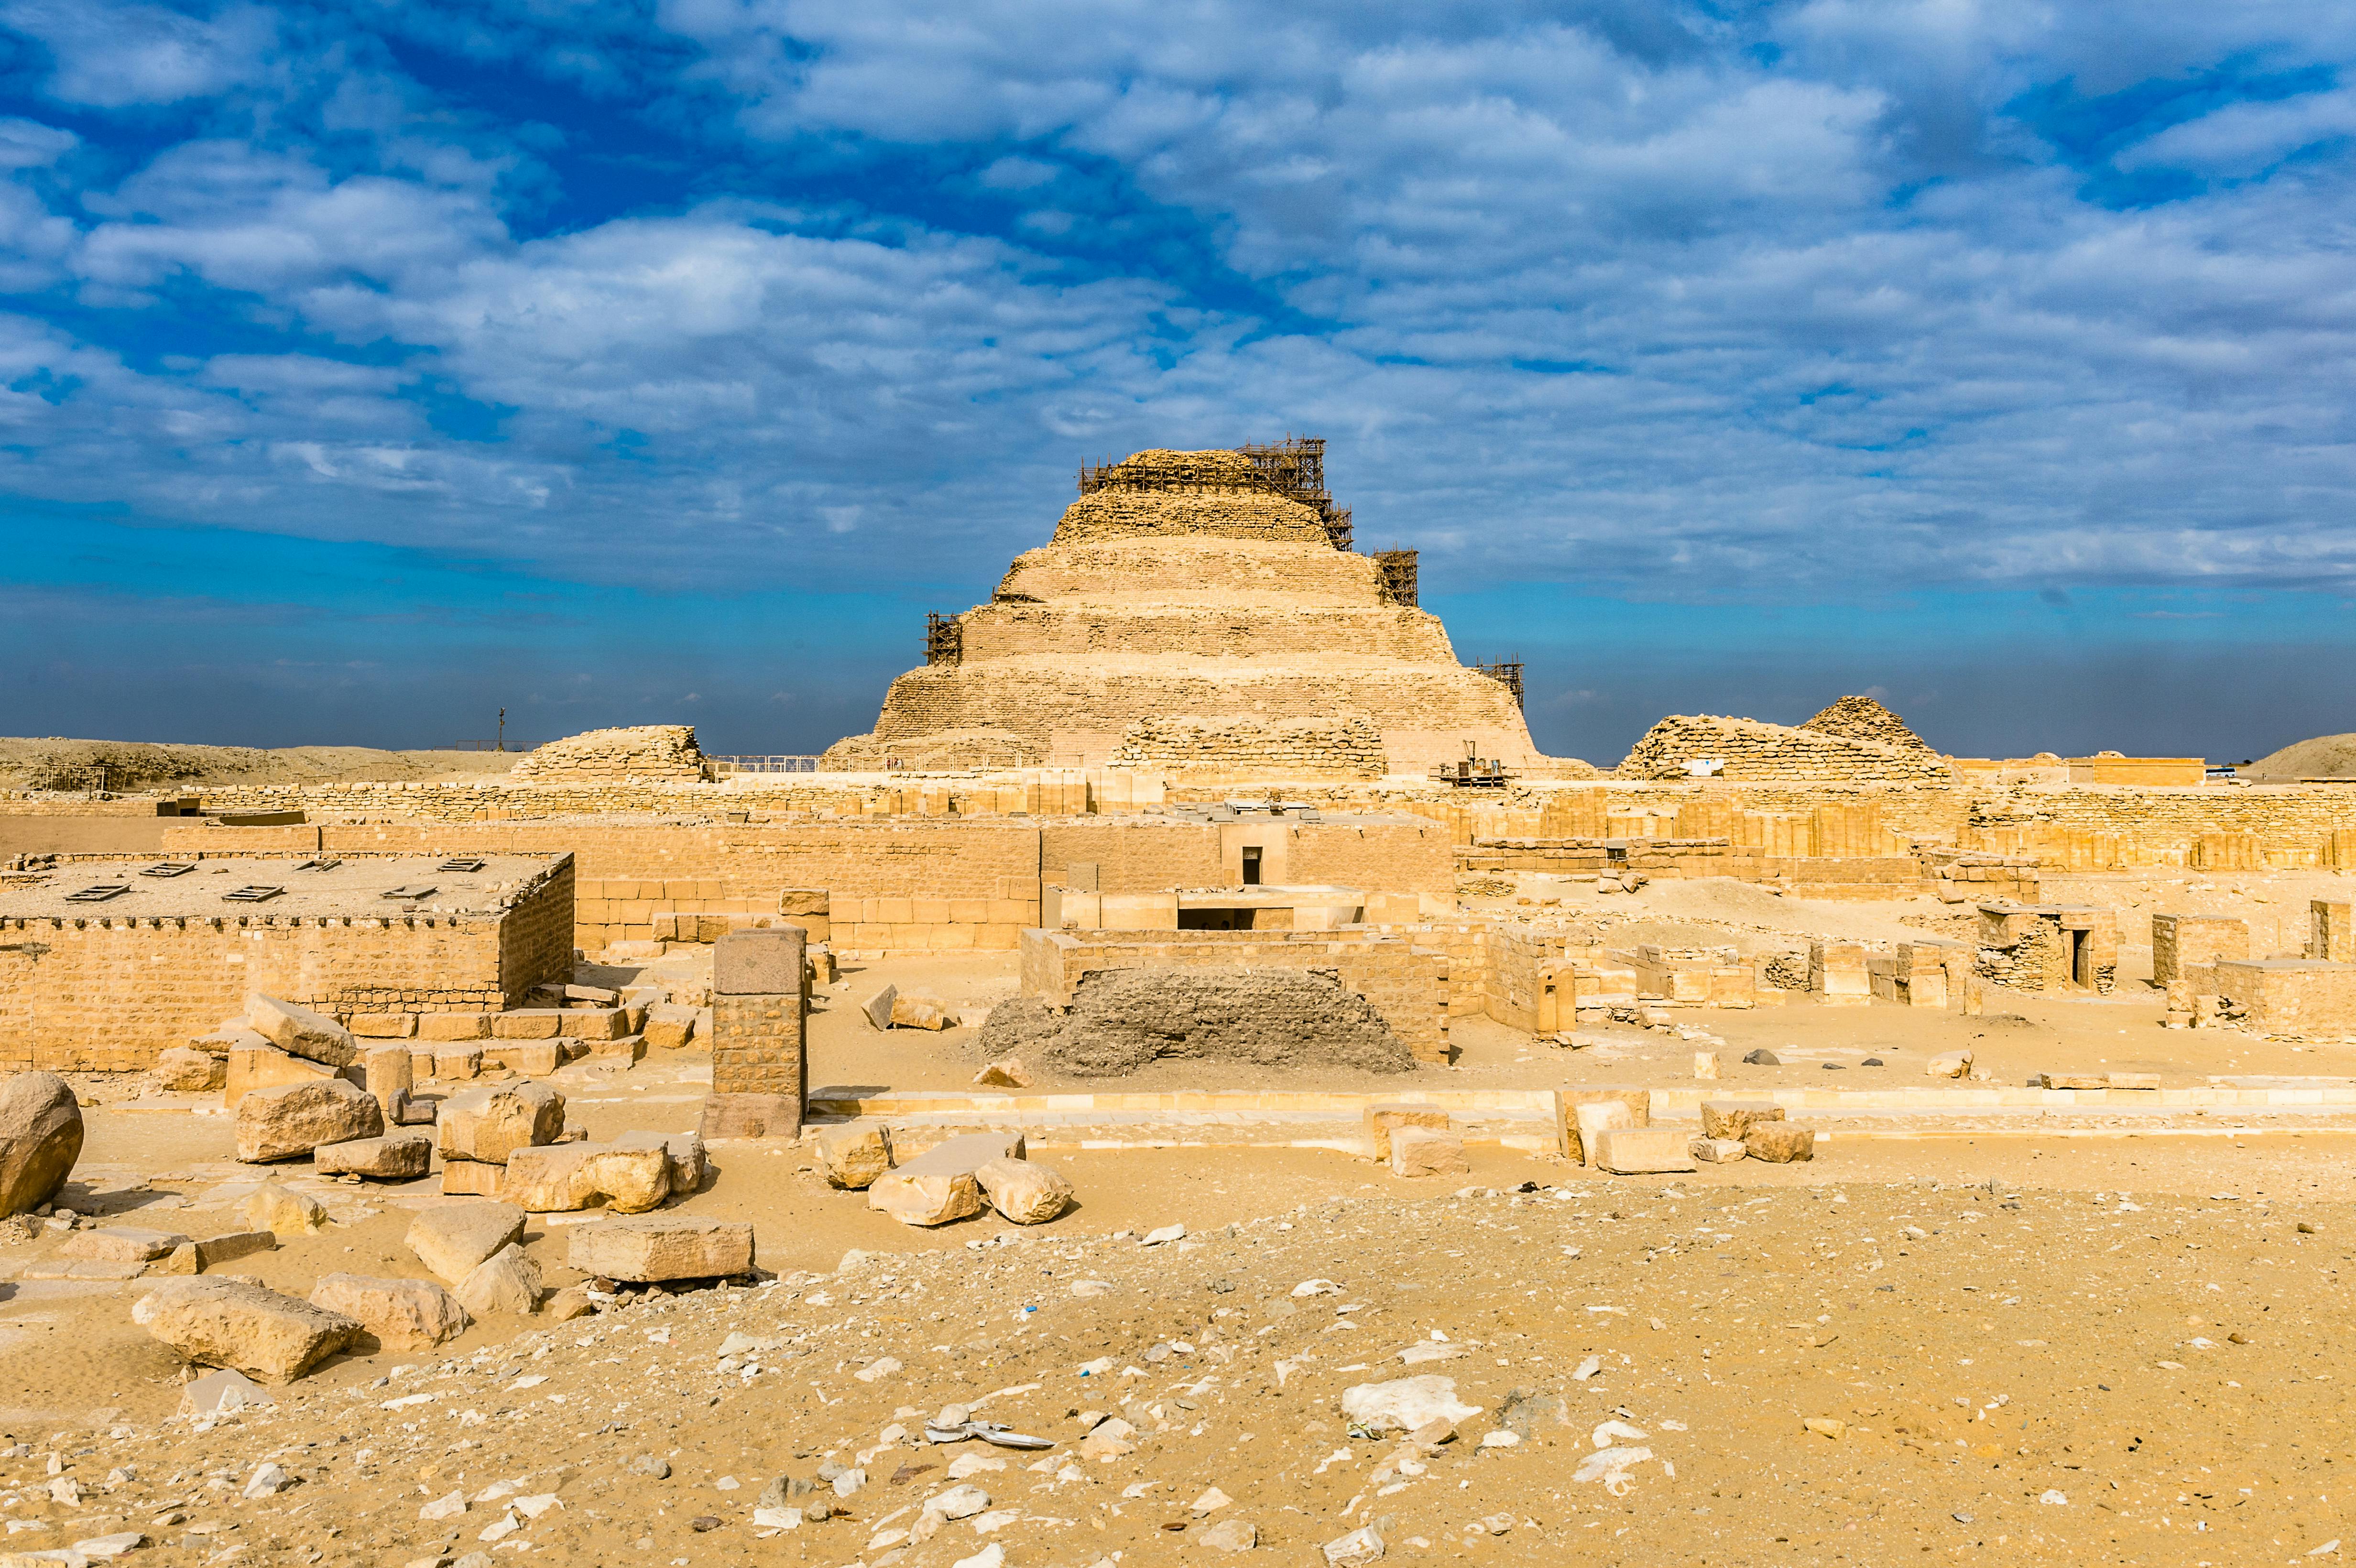 Memphis and Saqqara private tour with home cooked lunch from Cairo